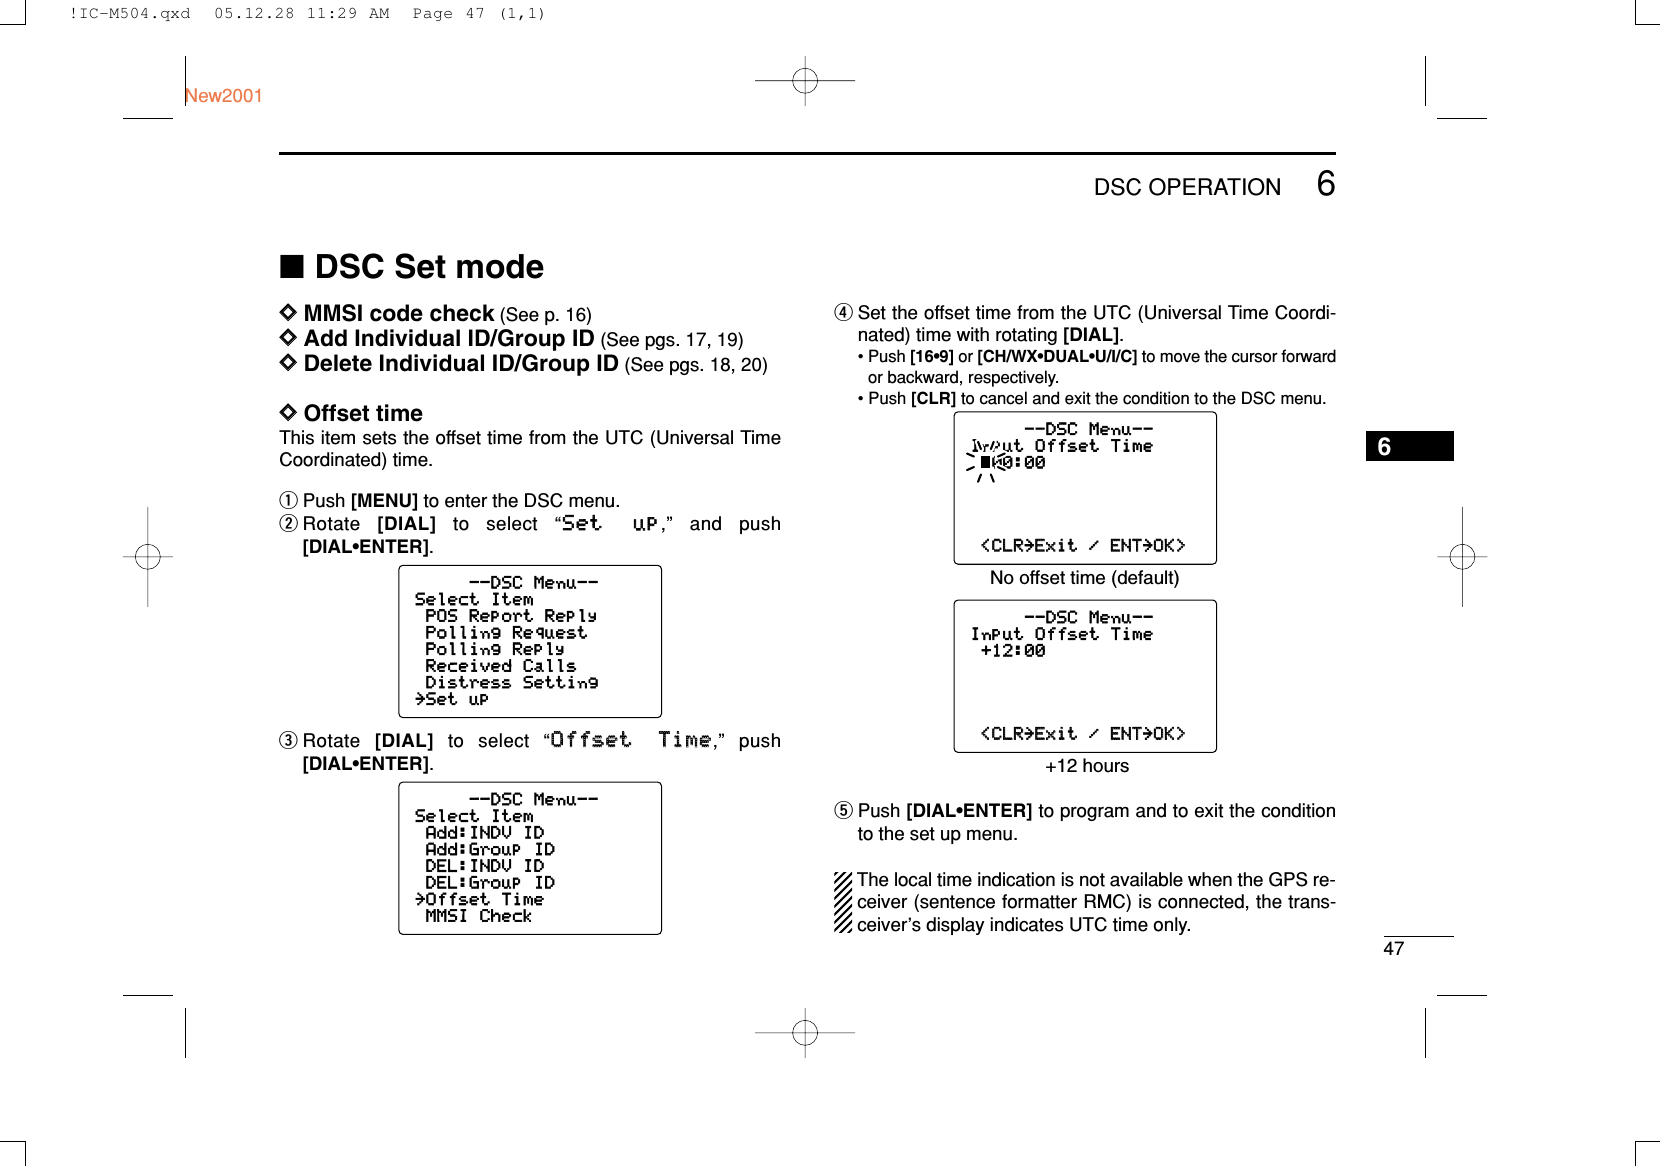 476DSC OPERATIONNew20016■DSC Set modeDDMMSI code check (See p. 16)DDAdd Individual ID/Group ID (See pgs. 17, 19)DDDelete Individual ID/Group ID (See pgs. 18, 20)DDOffset timeThis item sets the offset time from the UTC (Universal TimeCoordinated) time.qPush [MENU] to enter the DSC menu.wRotate  [DIAL] to select “SSeett uupp,” and push[DIAL•ENTER].eRotate  [DIAL]to select “OOffffsseett TTiimmee,” push[DIAL•ENTER].rSet the offset time from the UTC (Universal Time Coordi-nated) time with rotating [DIAL].• Push [16•9] or [CH/WX•DUAL•U/I/C] to move the cursor forwardor backward, respectively.• Push [CLR] to cancel and exit the condition to the DSC menu.tPush [DIAL•ENTER] to program and to exit the conditionto the set up menu.The local time indication is not available when the GPS re-ceiver (sentence formatter RMC) is connected, the trans-ceiver’s display indicates UTC time only.--DSC Menu--Input Offset Time+12:00&lt;CLR&lt;CLR˘ExitExit /ENTENT˘OK&gt;OK&gt;--DSC Menu--Input Offset Time00:00&lt;CLR&lt;CLR˘ExitExit /ENTENT˘OK&gt;OK&gt;No offset time (default) +12 hours--DSC Menu--Select ItemAdd:INDV IDAdd:Group IDDEL:INDV IDDEL:Group ID˘Offset TimeMMSI Check--DSC Menu--Select ItemPOS Report ReplyPolling RequestPolling ReplyReceived CallsDistress Setting˘Set up!IC-M504.qxd  05.12.28 11:29 AM  Page 47 (1,1)